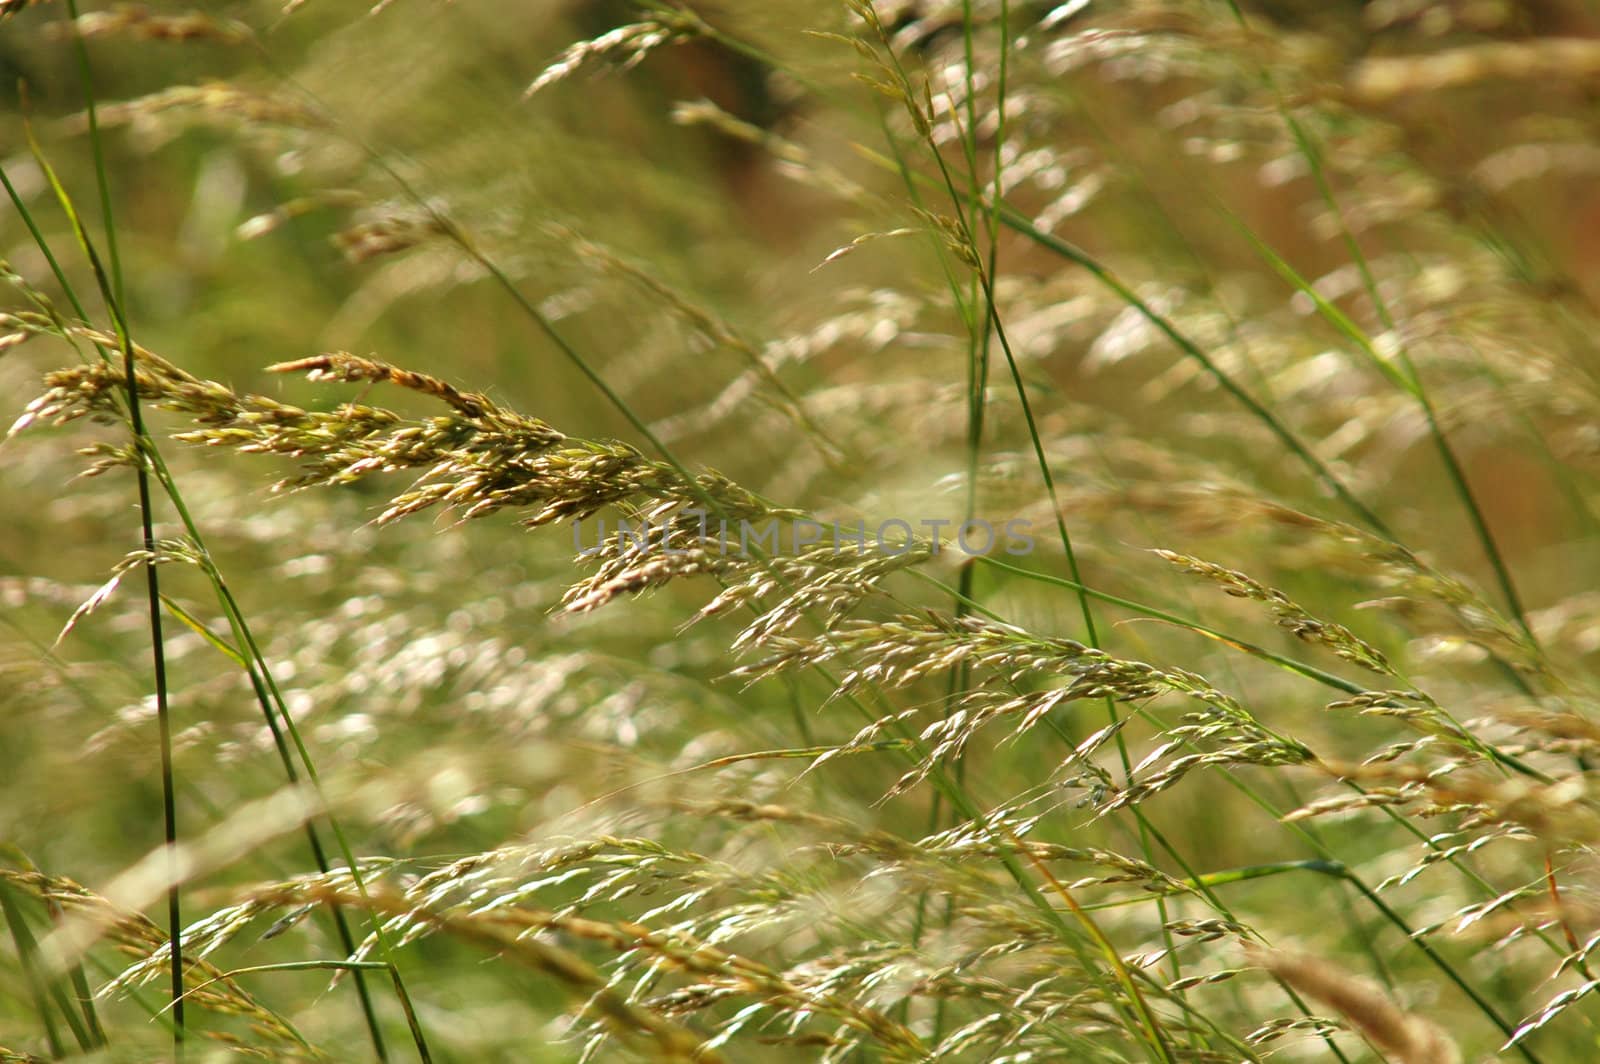 Tall grass blowing in the breeze in a summer meadow